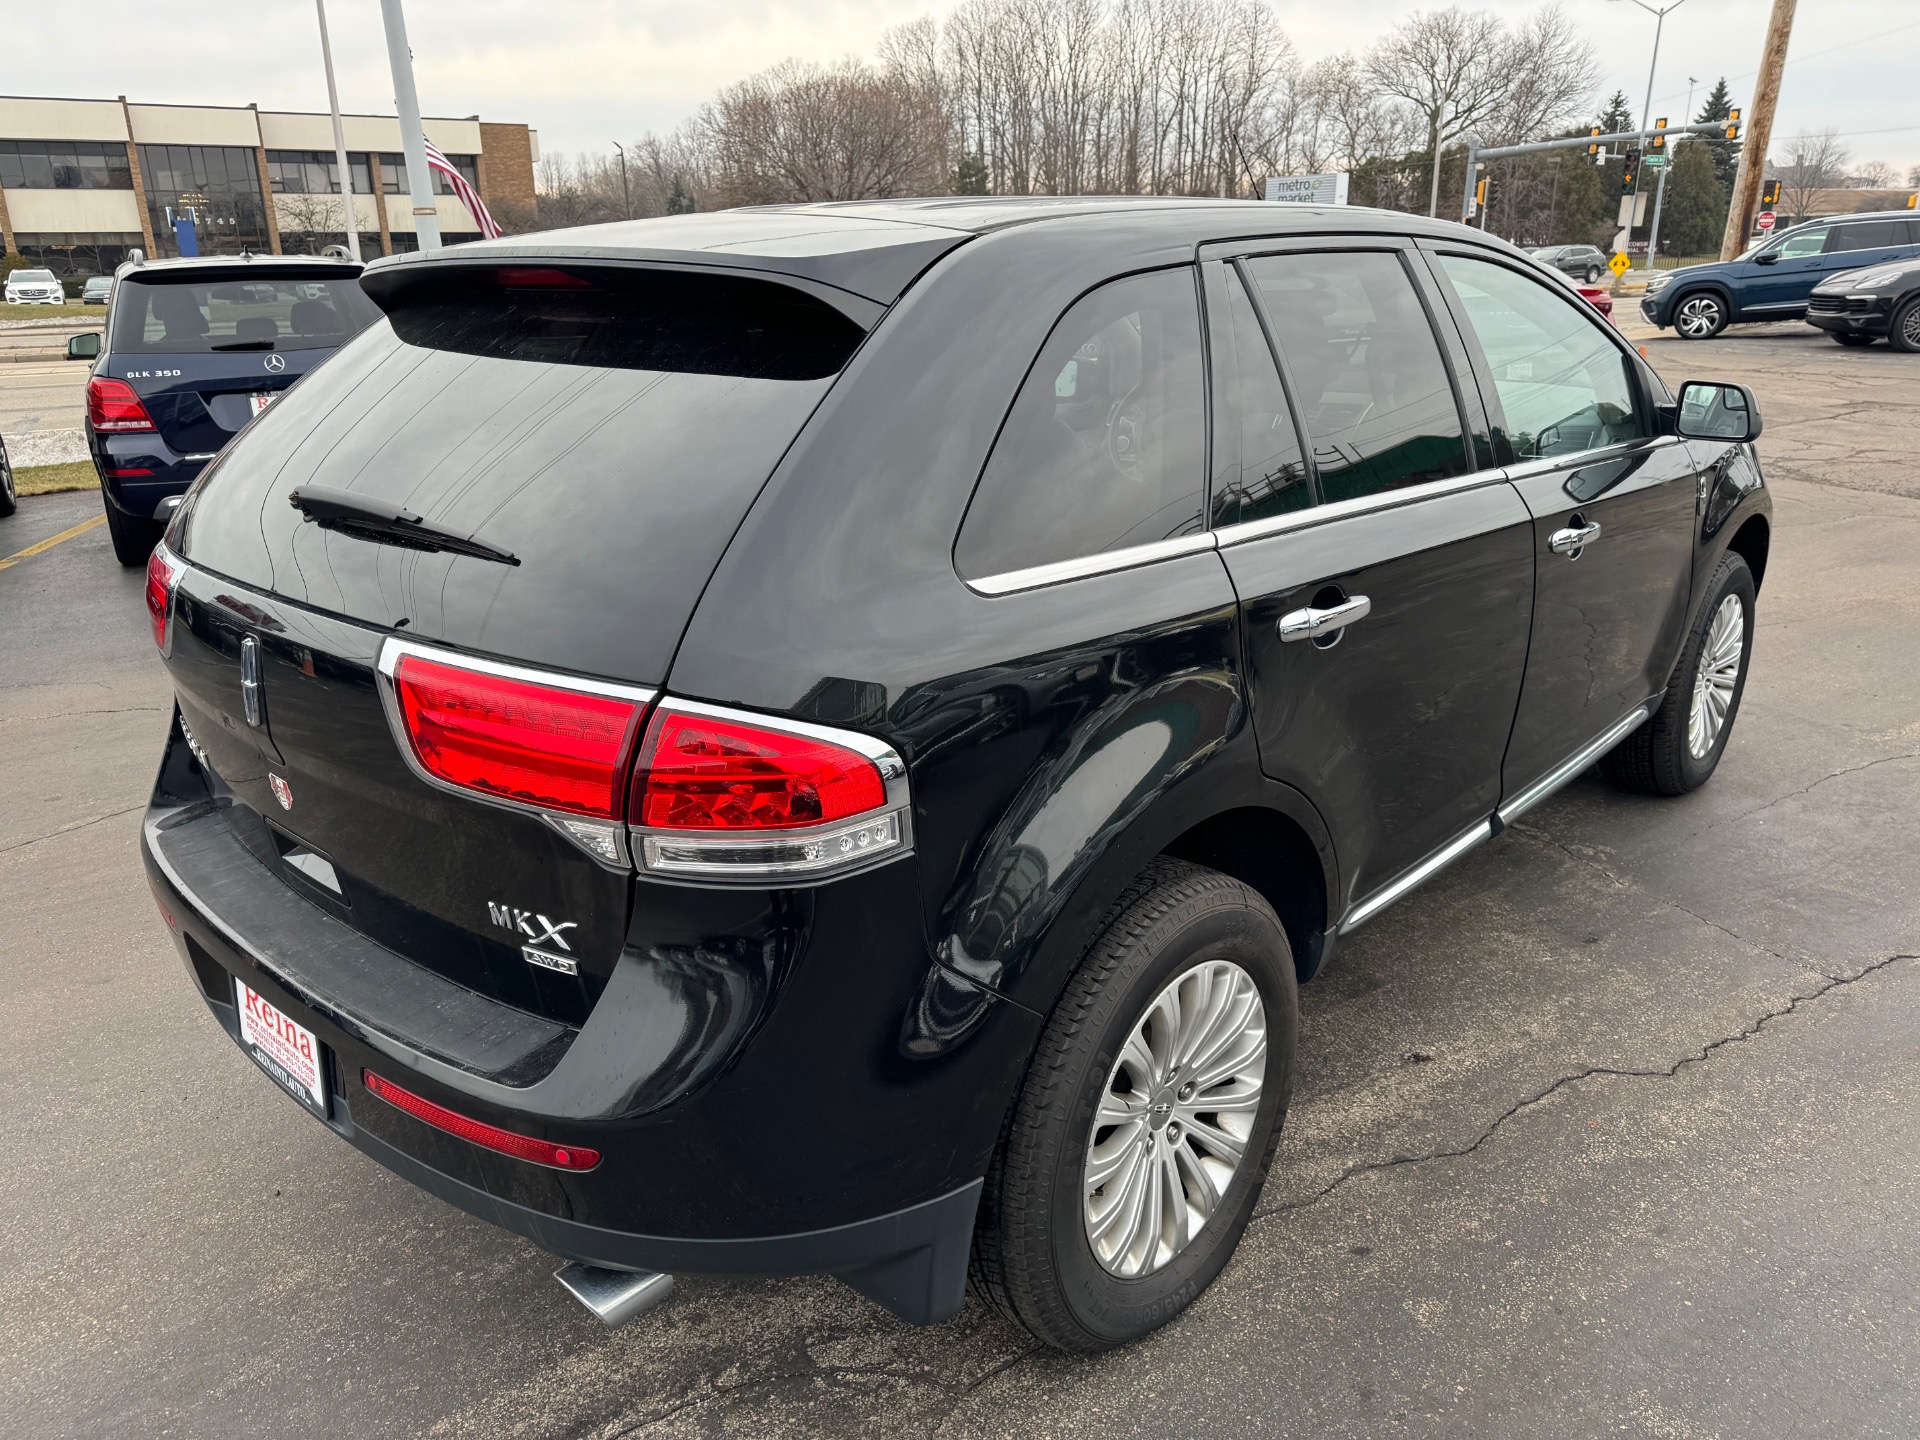 Used-2013-Lincoln-MKX-AWD